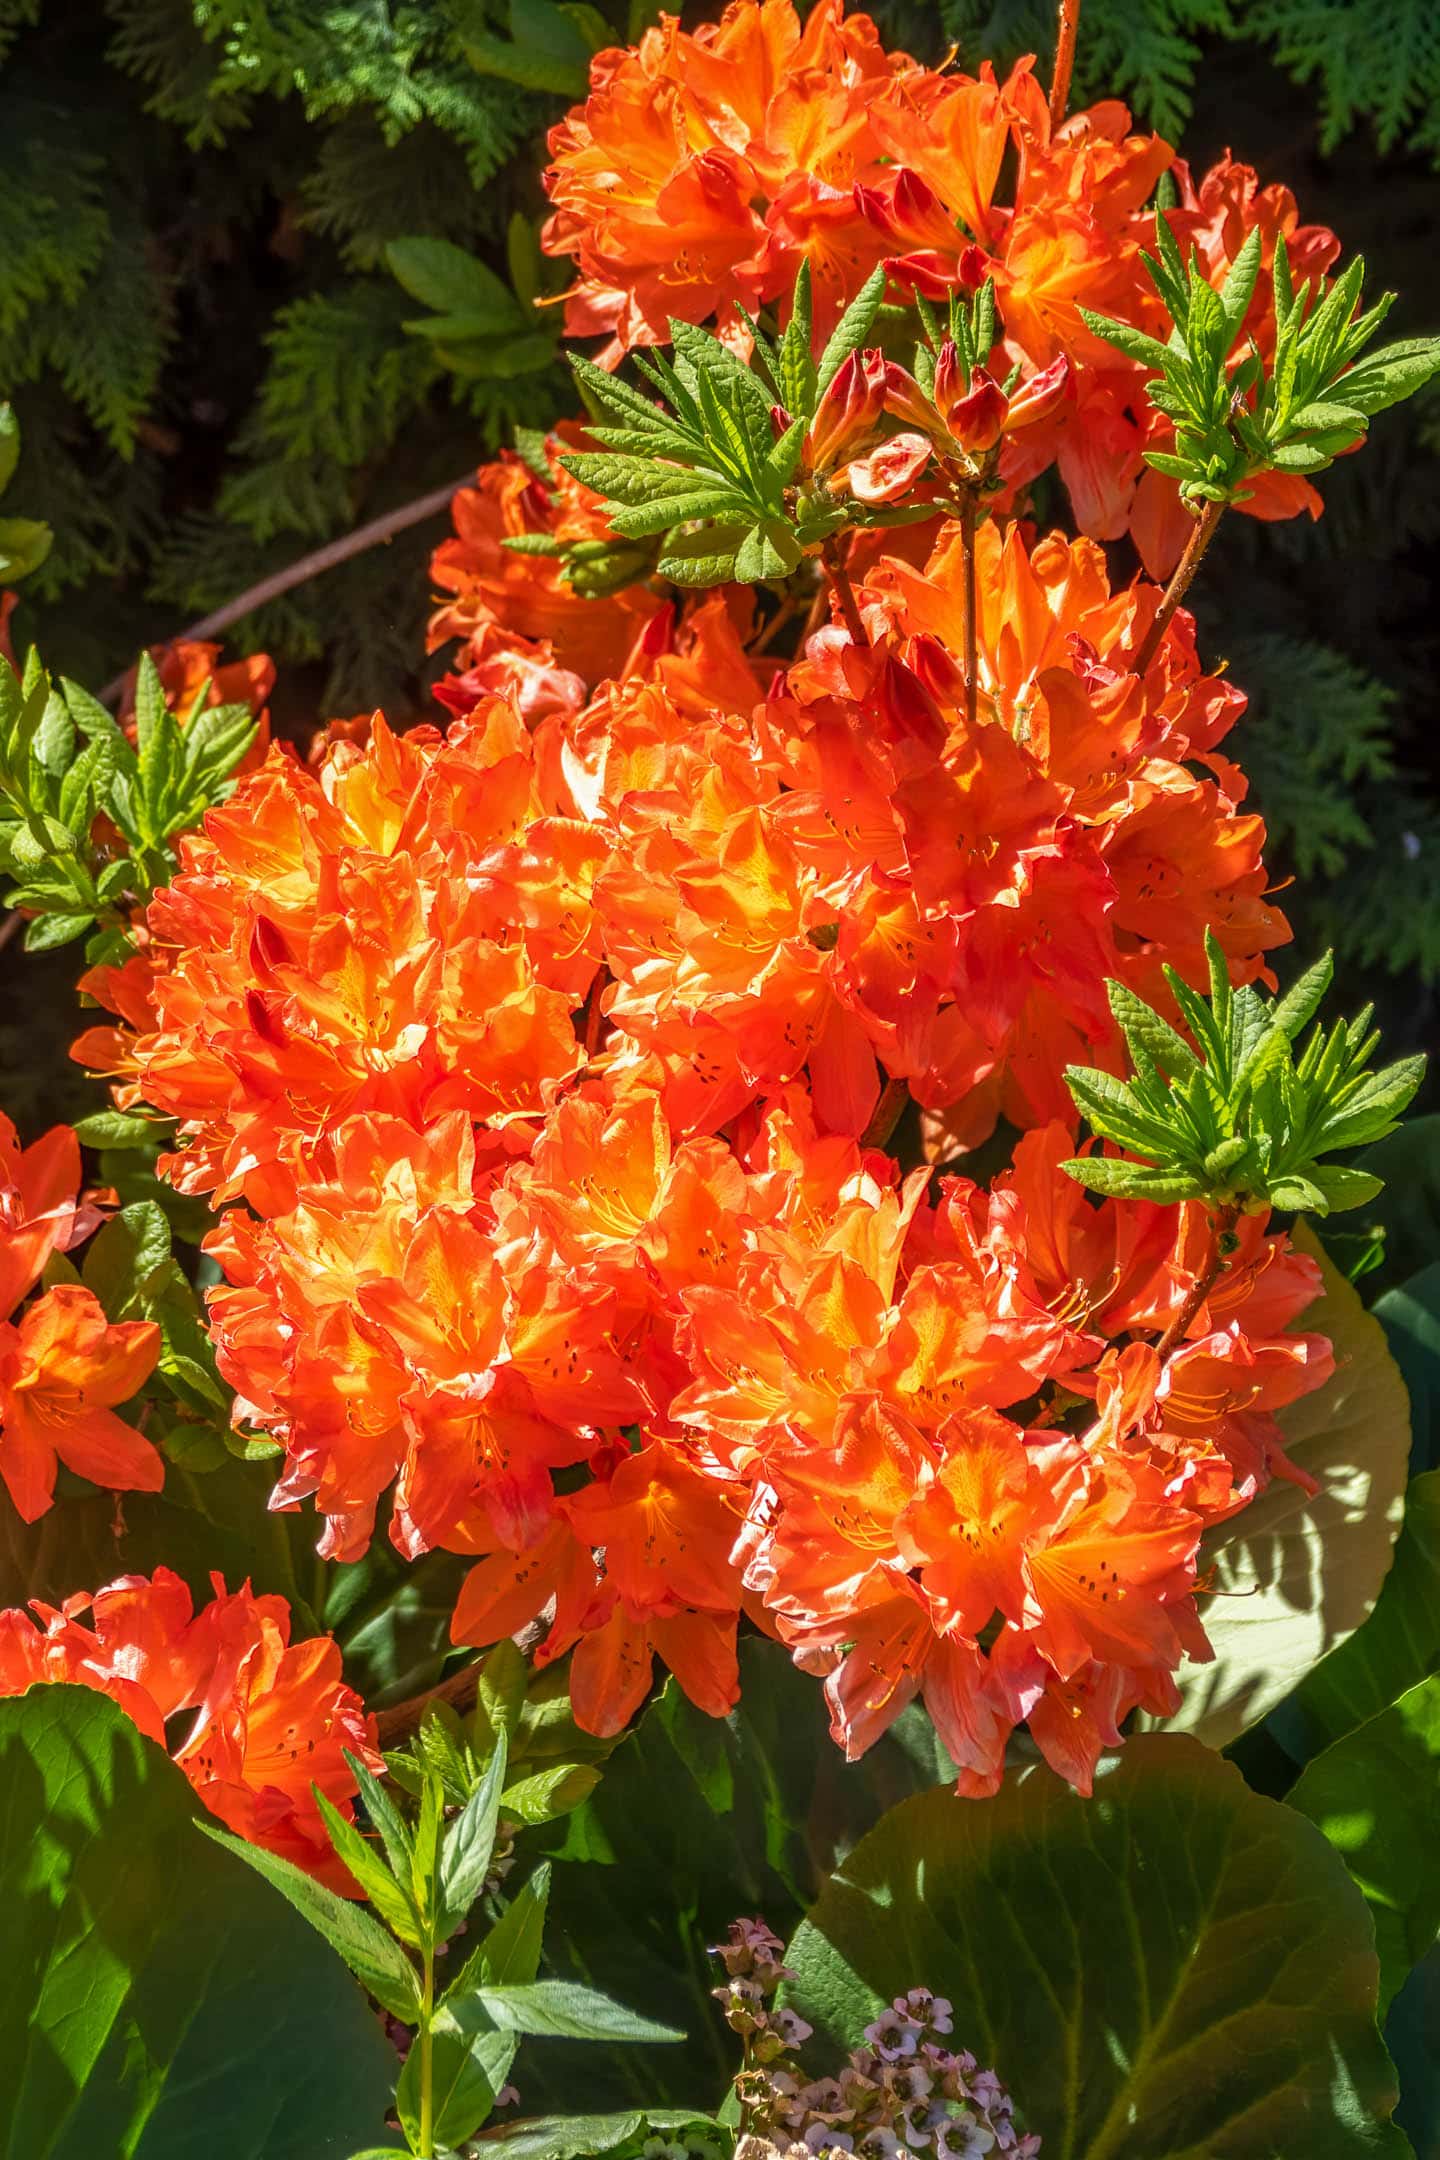 Rhododendron 'Gibraltar' with orange flowers